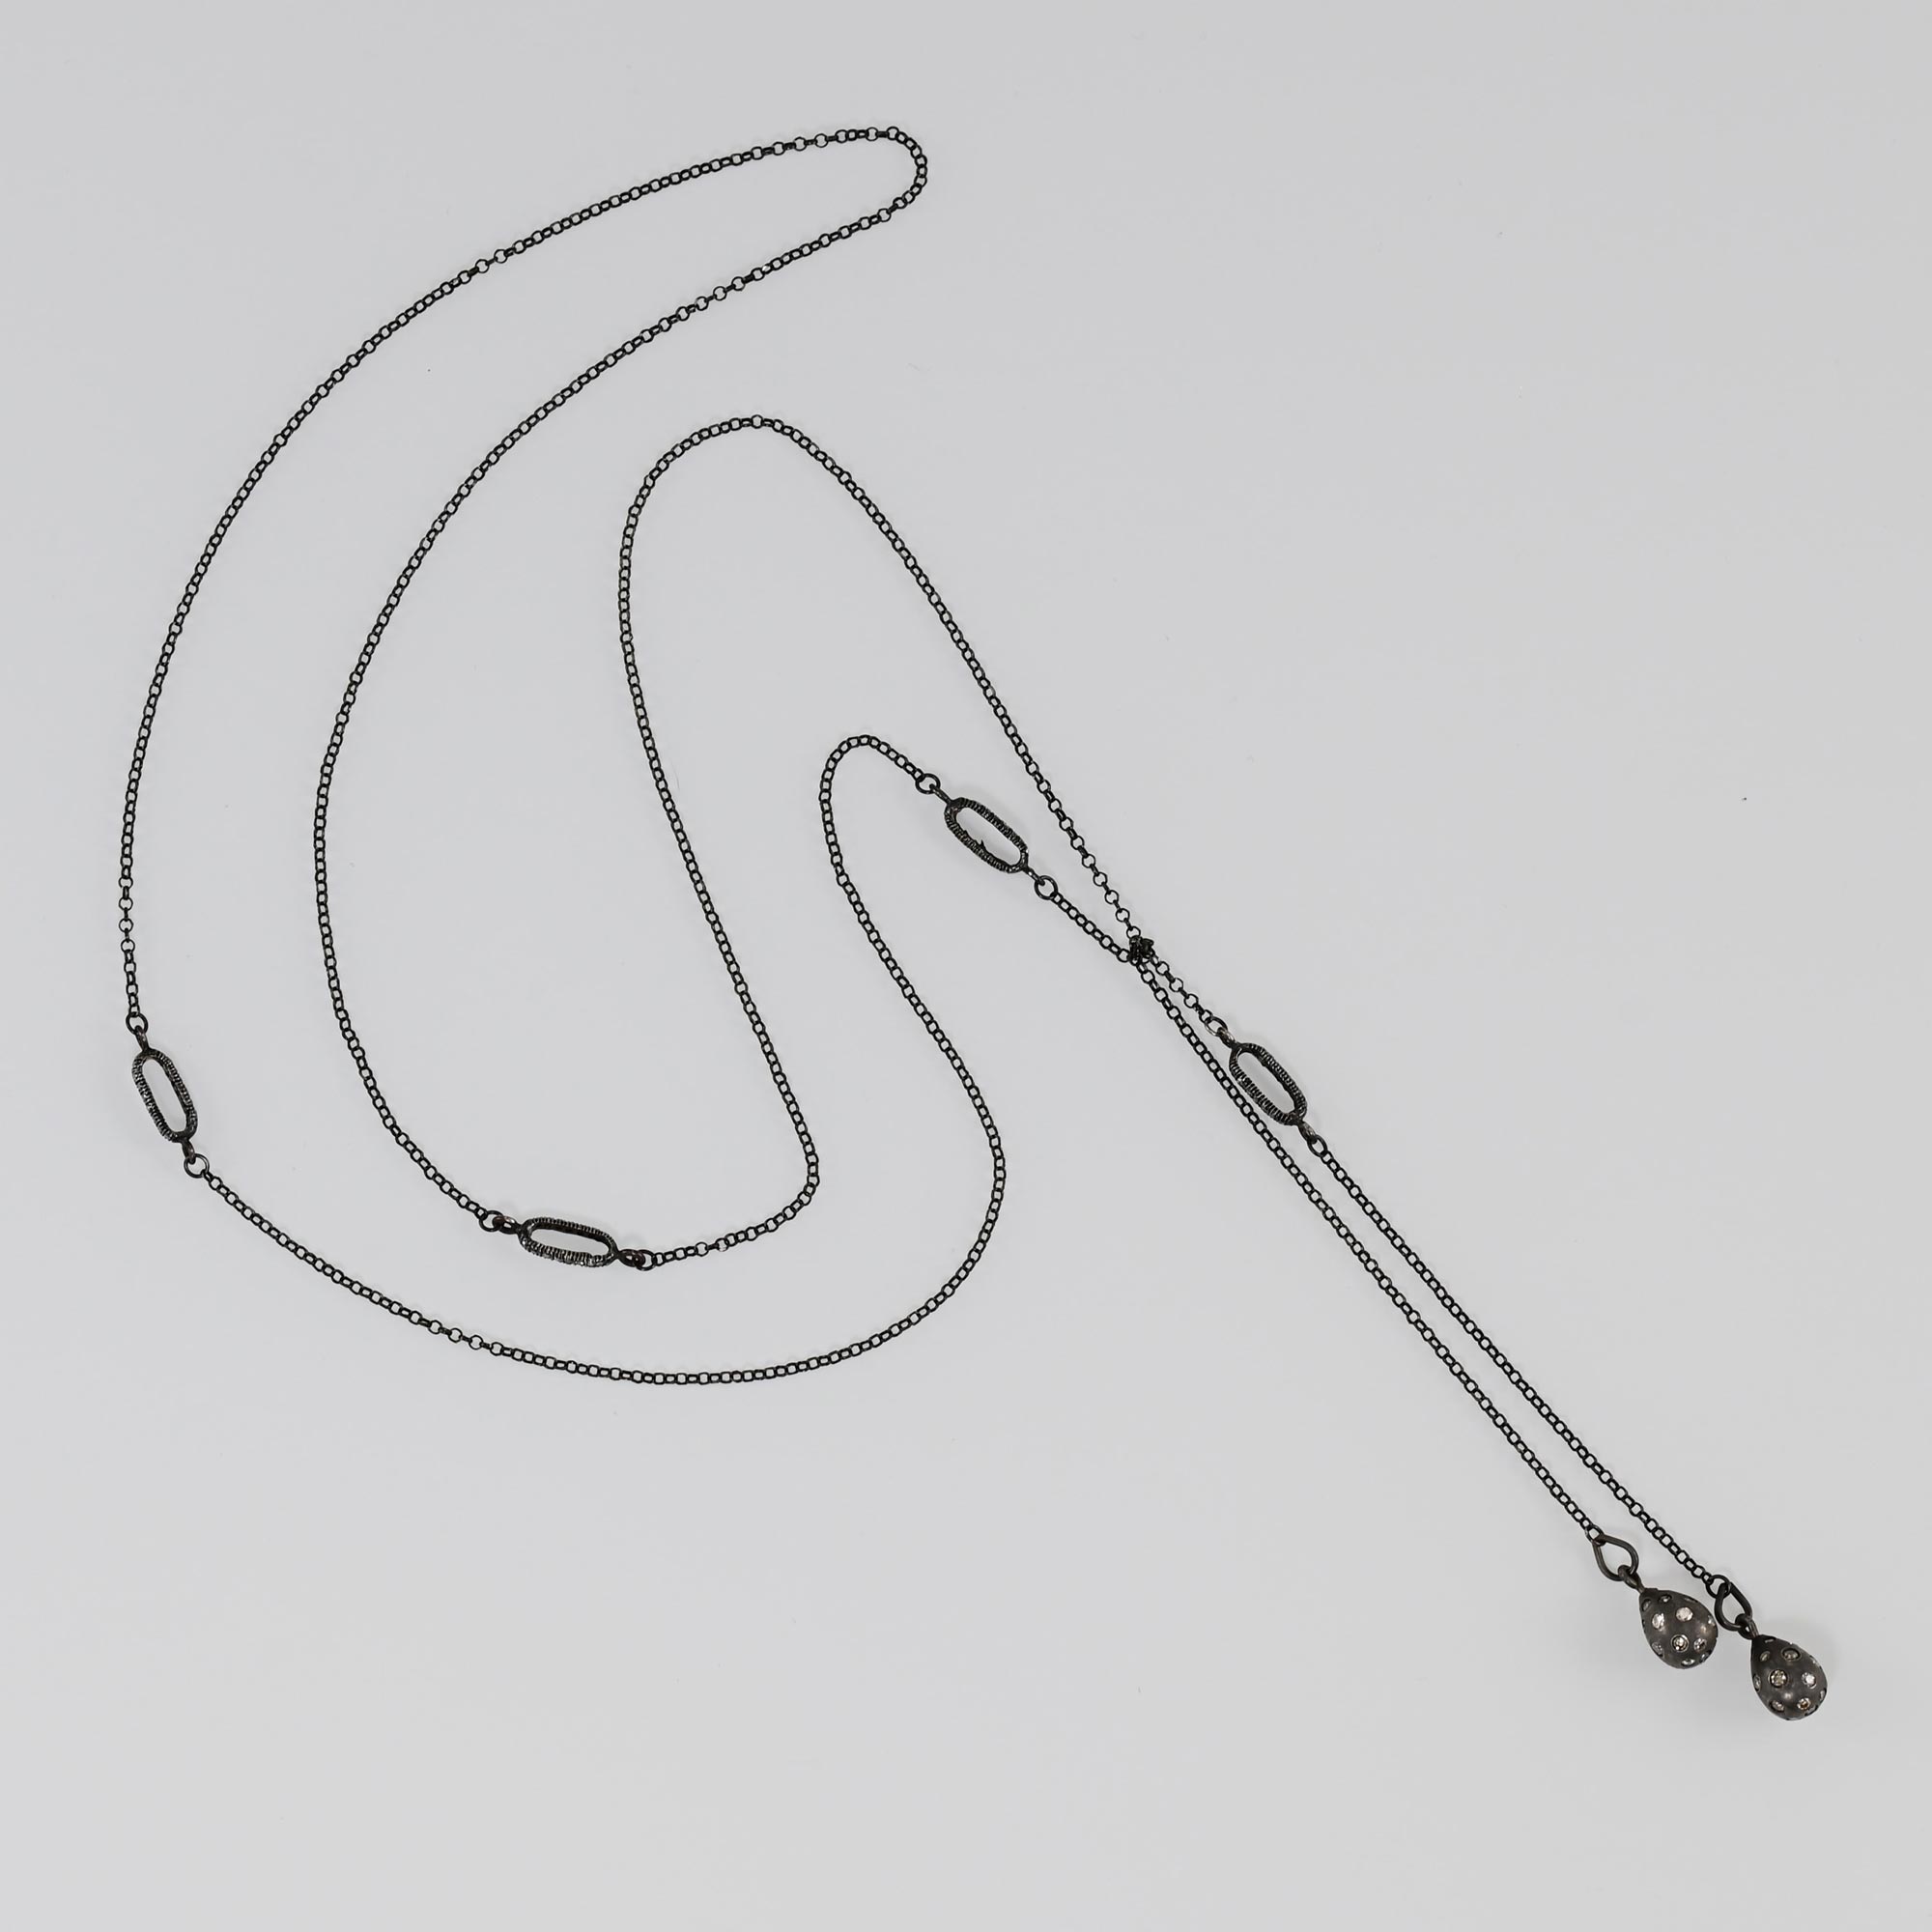 Delicate long oxidized silver chain lariat with floating diamond links